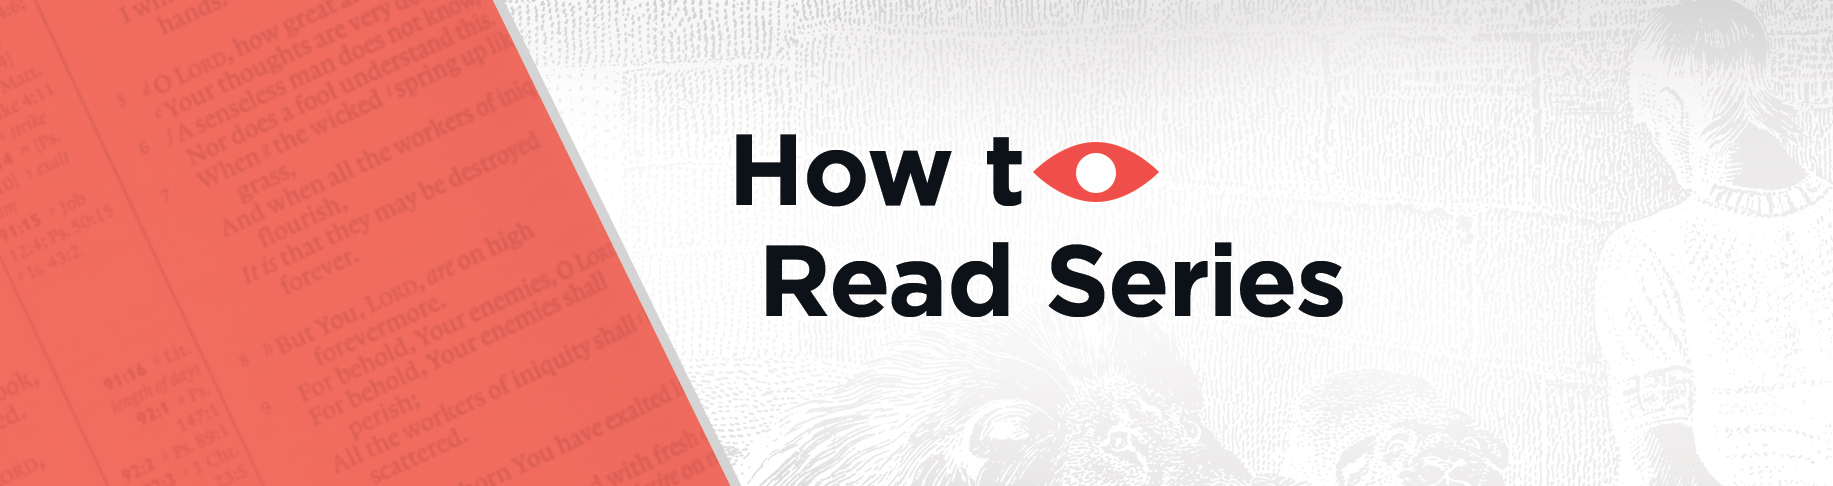 How to Read Series